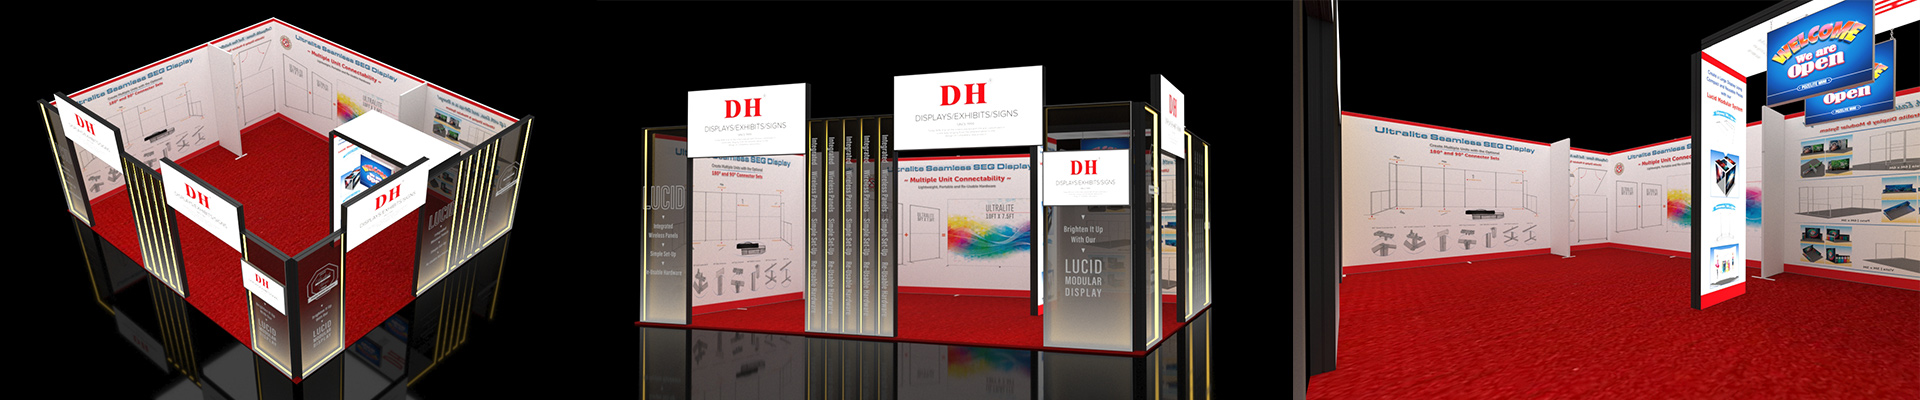 customized display stands manufacturer - DH Display